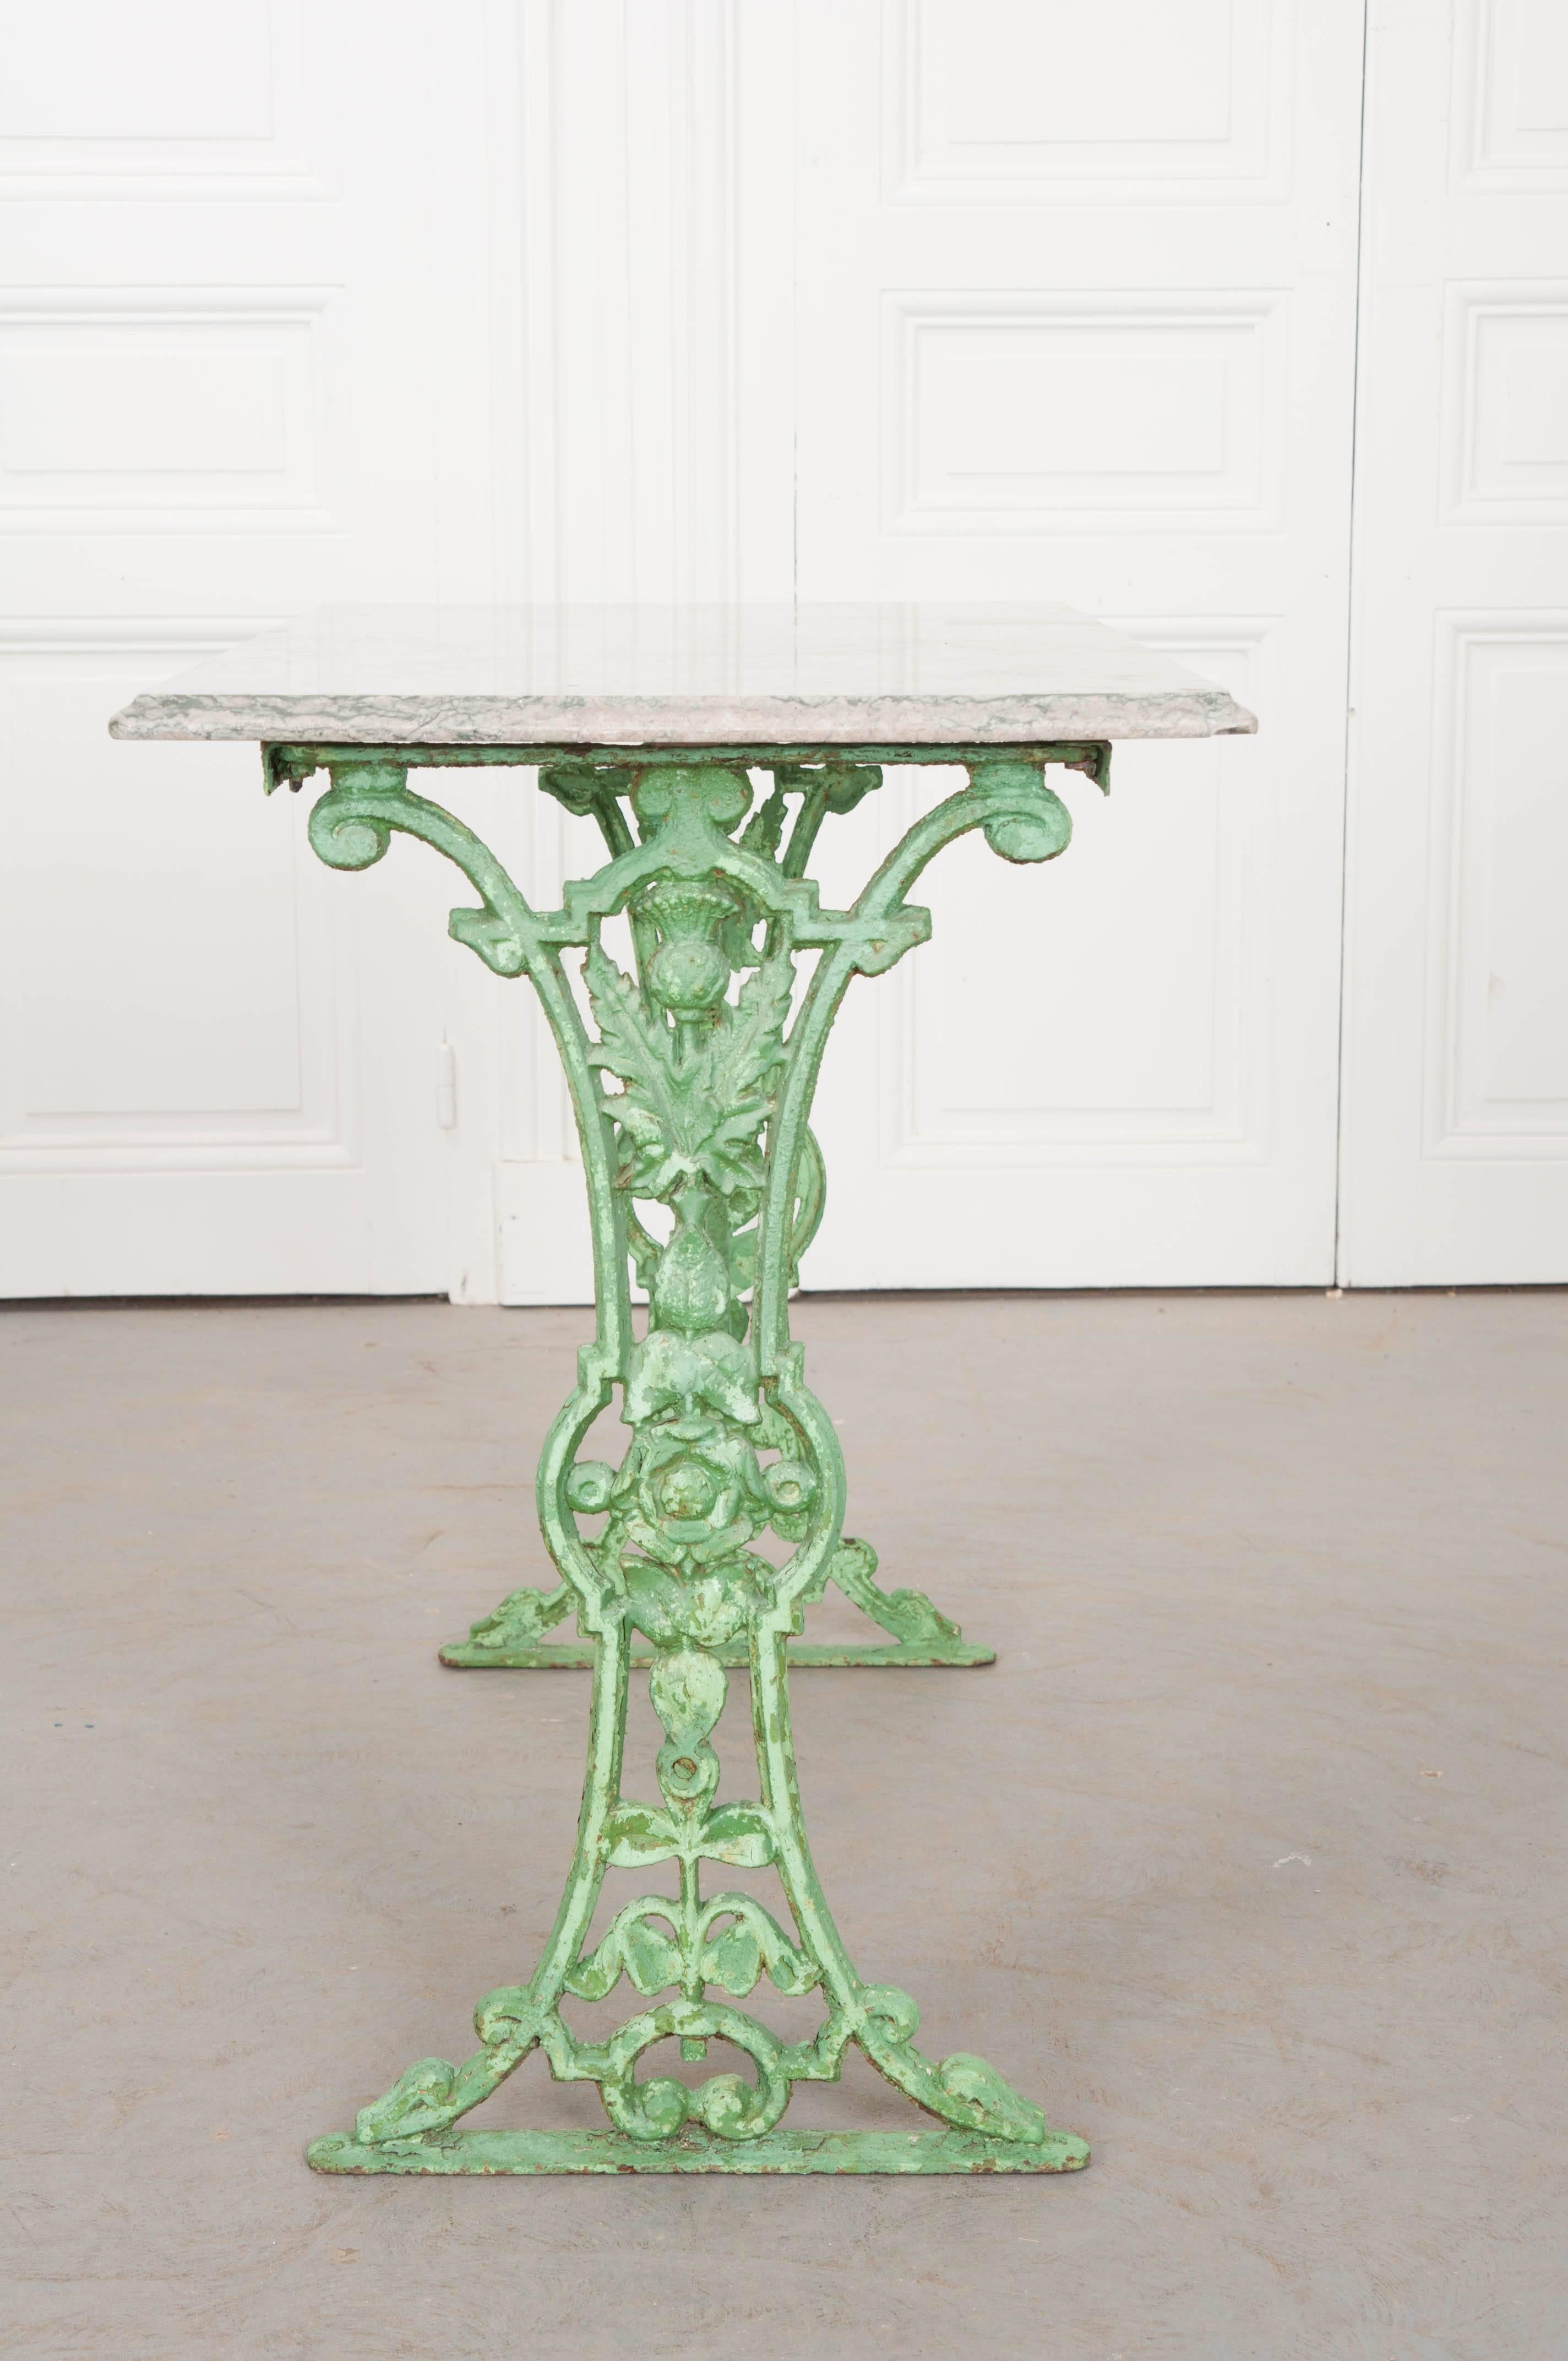 This gorgeous iron and marble bistro table comes from 19th century France. The marble top is in wonderful antique condition with unique and beautiful coloration. The top is supported by the table’s green-painted iron base. The green paint that coats